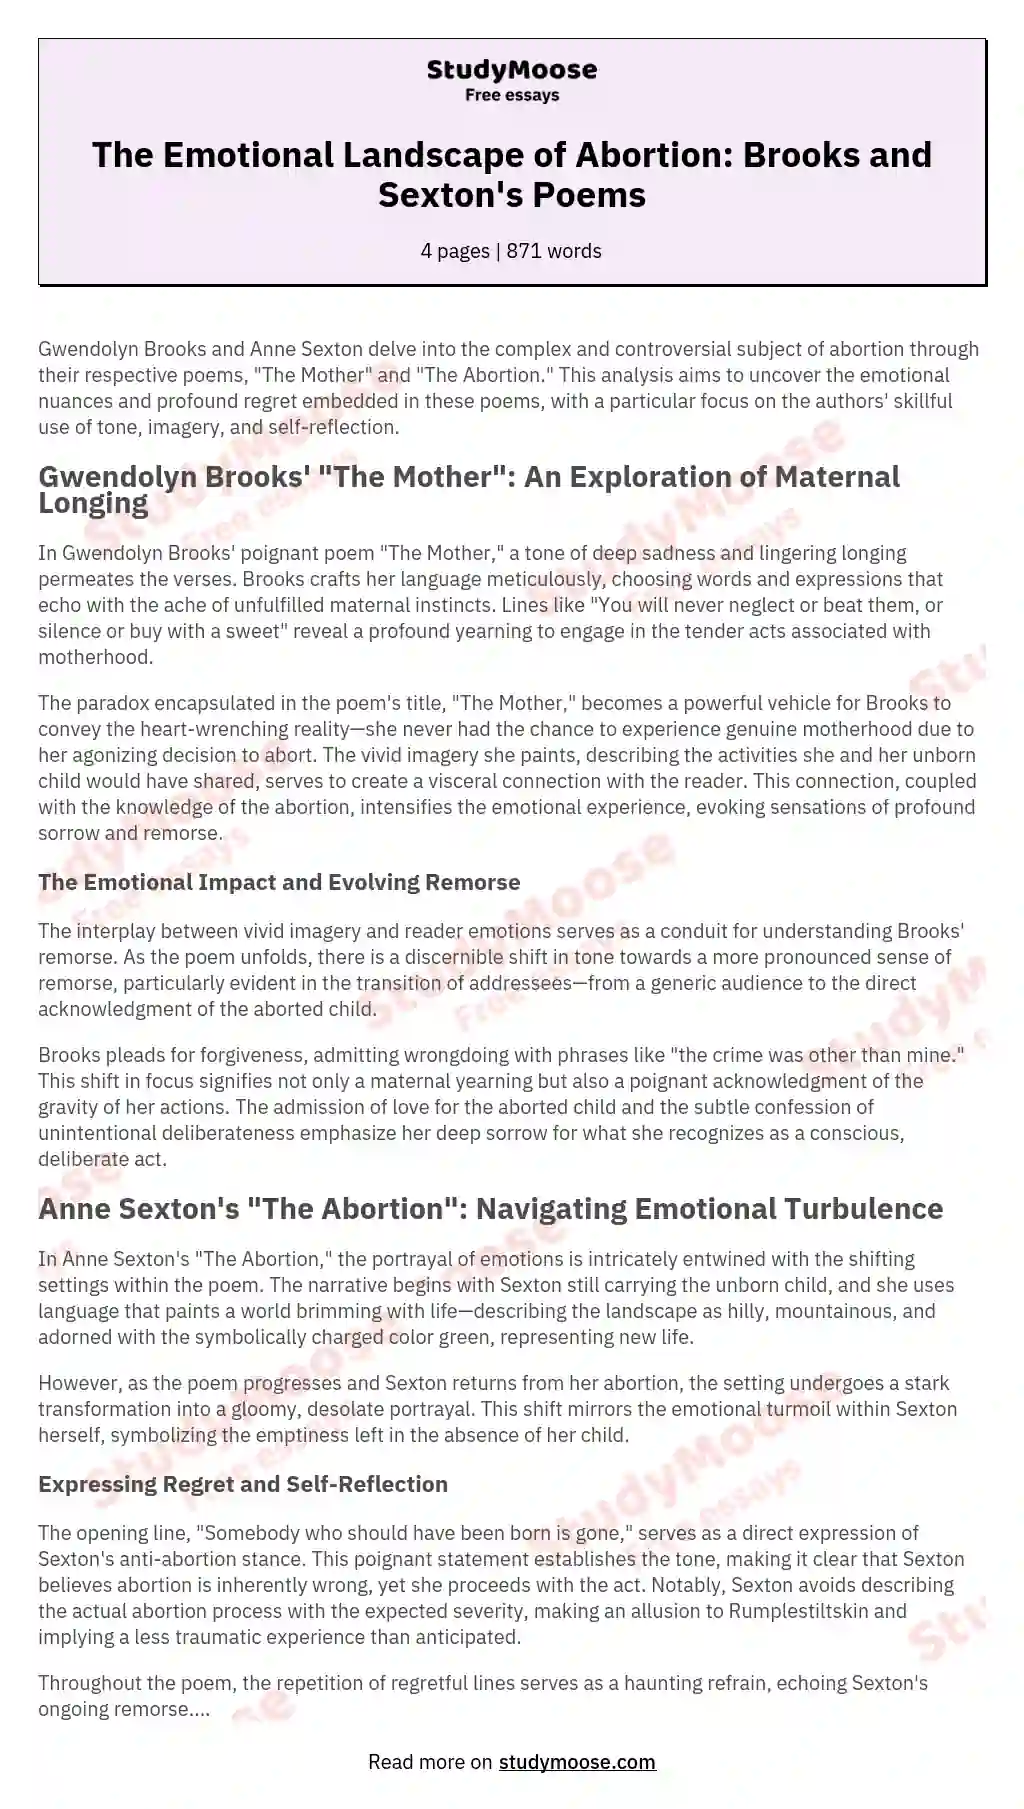 Poems on Abortion by Brooks and Sexton: Exploring Taboo Topics